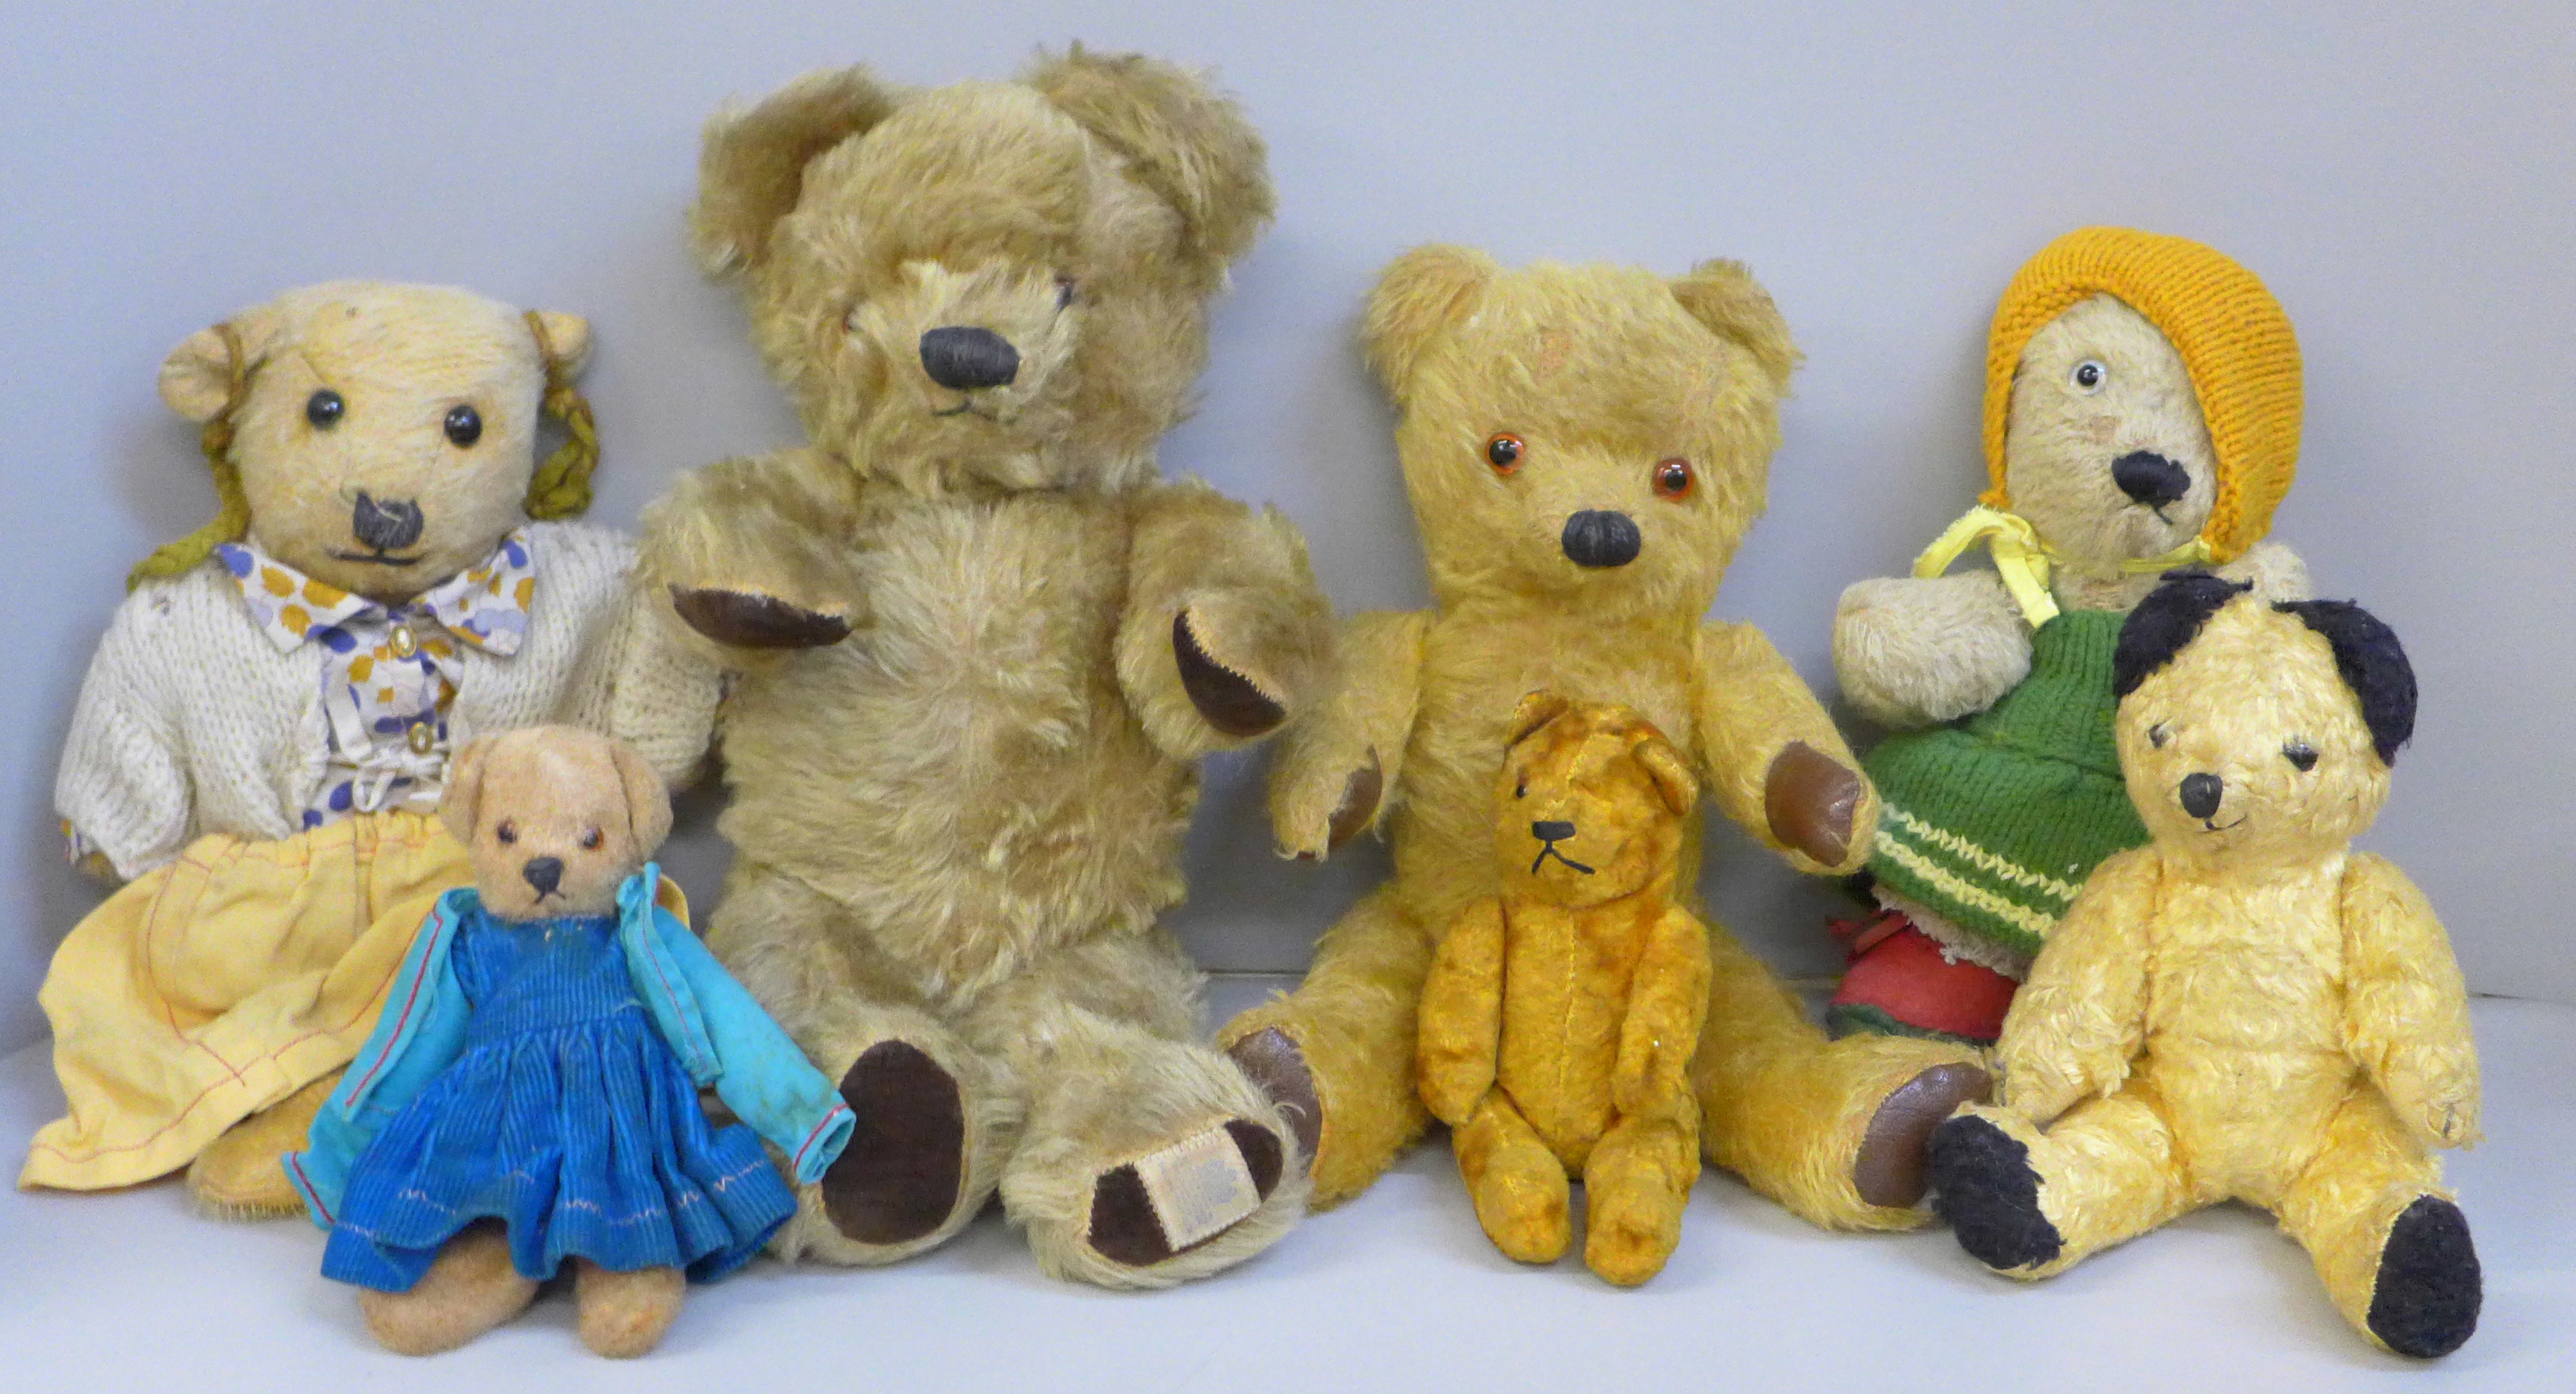 Seven vintage Teddy bears including one musical